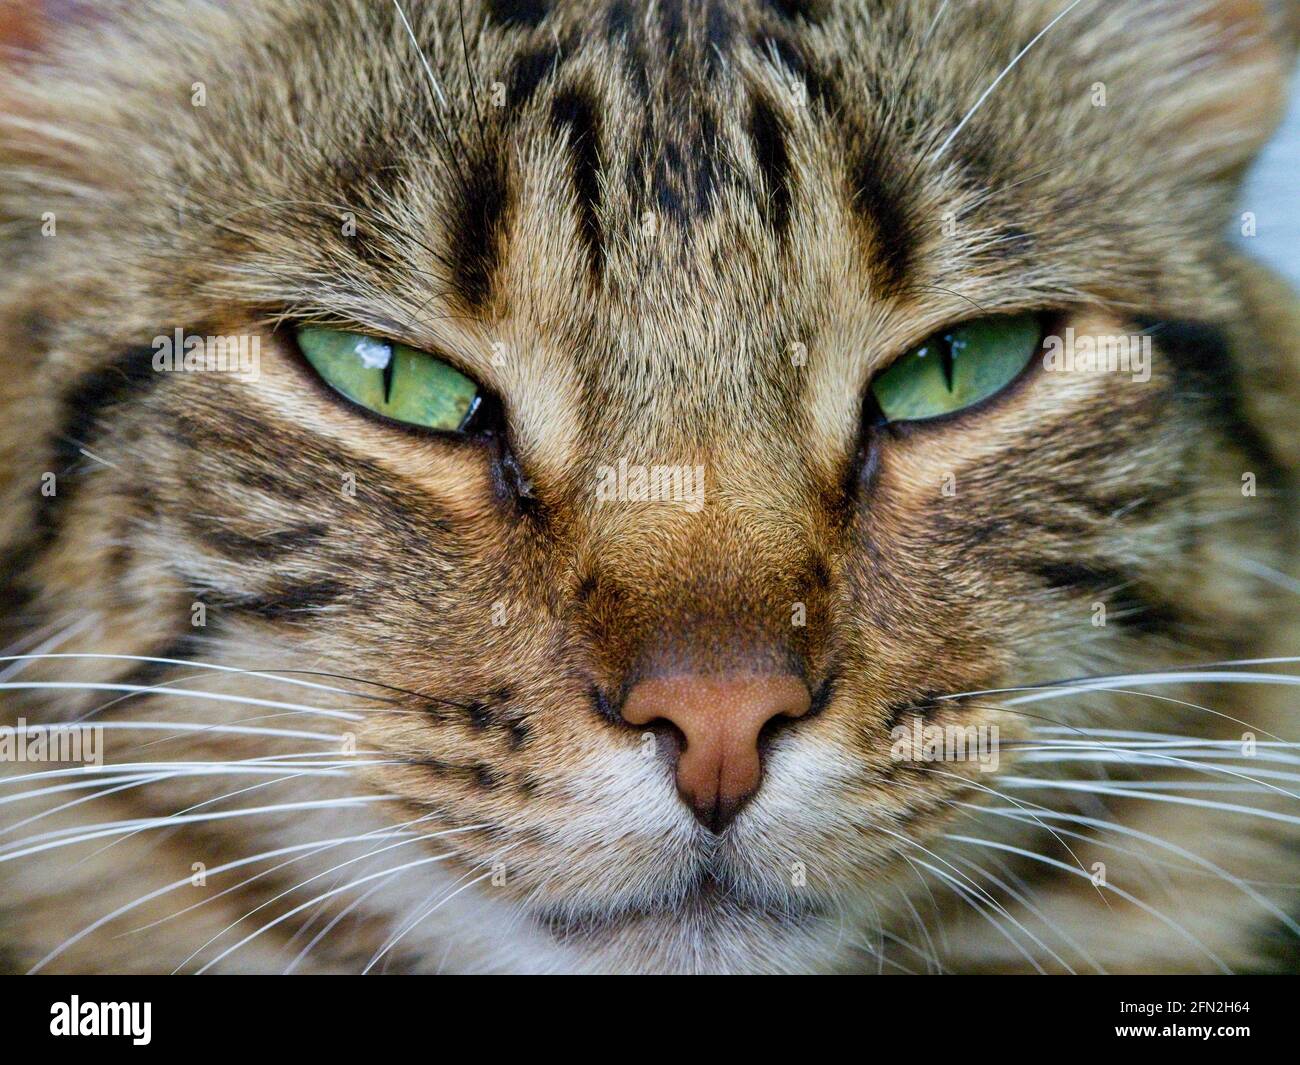 Closeup portrait of cute tabby cat with whiskers Ecuador. Stock Photo